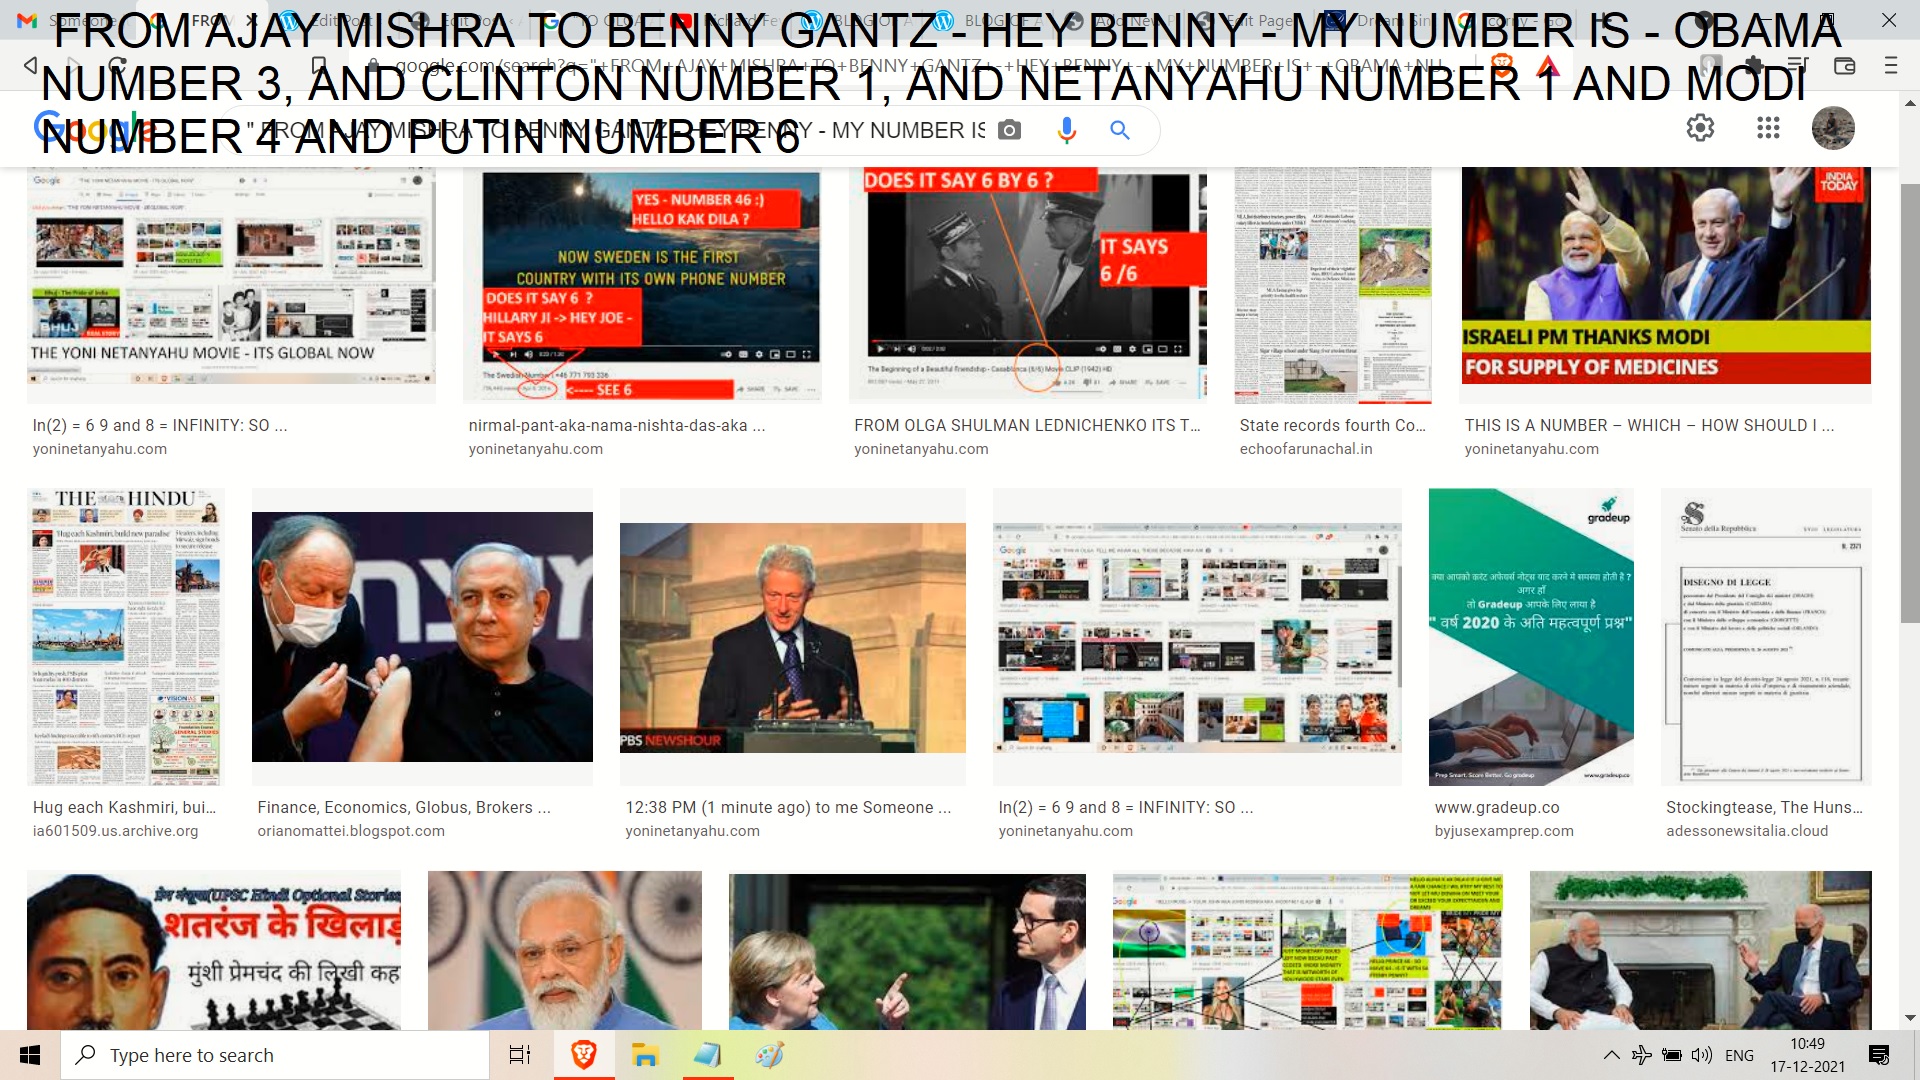 FROM AJAY MISHRA TO BENNY GANTZ - HEY BENNY - MY NUMBER IS - OBAMA NUMBER 3, AND CLINTON NUMBER 1, AND NETANYAHU NUMBER 1 AND MODI NUMBER 4 AND PUTIN NUMBER 6